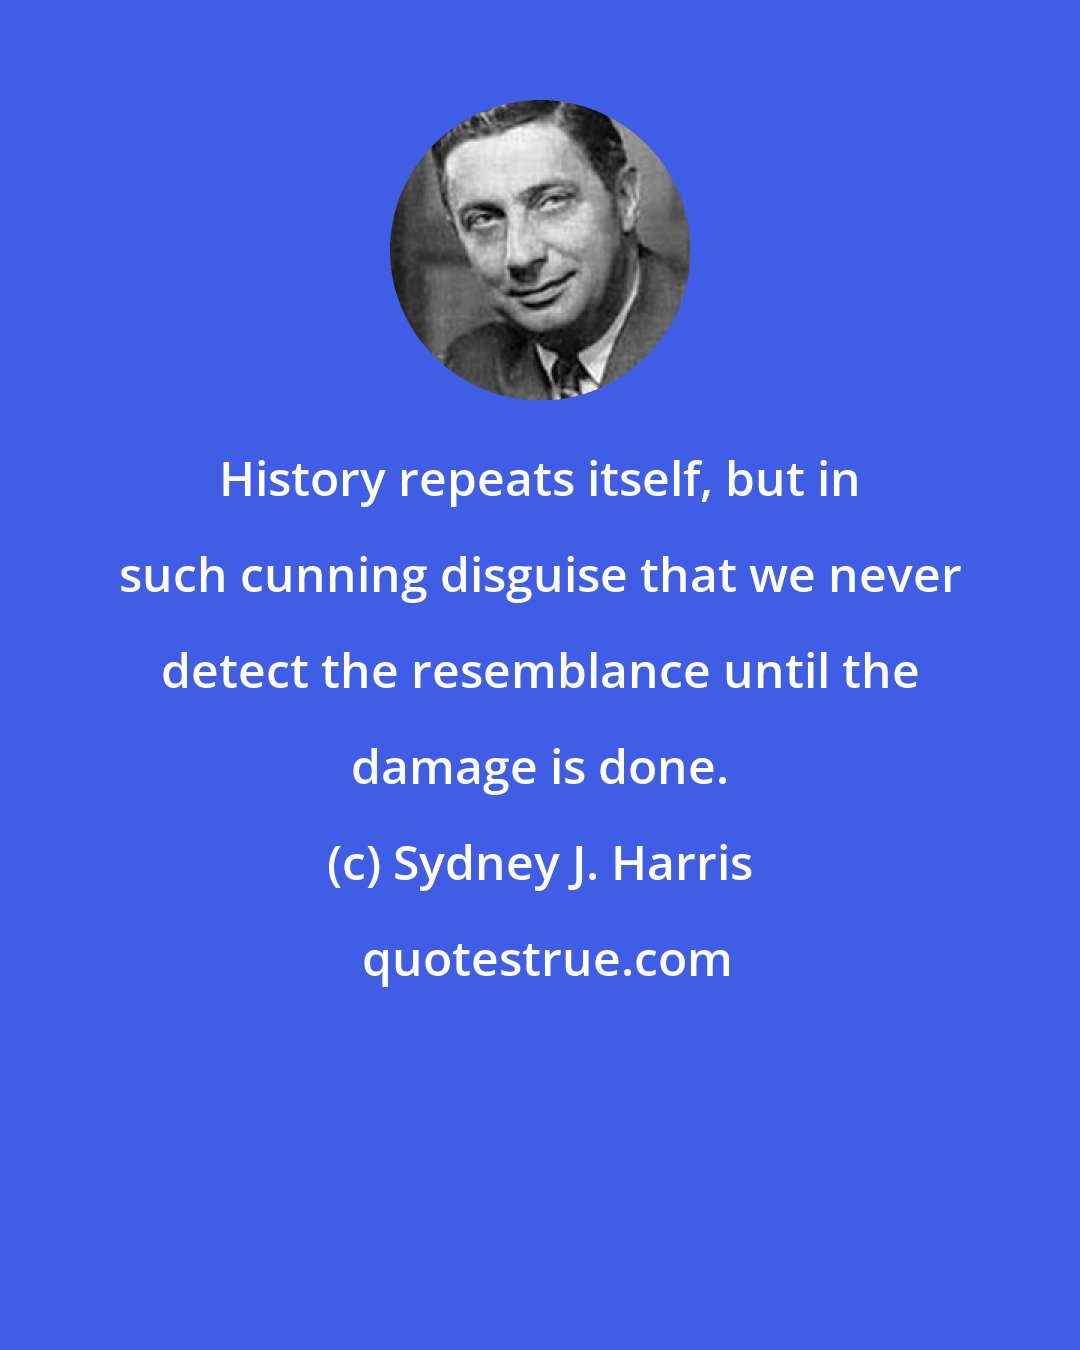 Sydney J. Harris: History repeats itself, but in such cunning disguise that we never detect the resemblance until the damage is done.